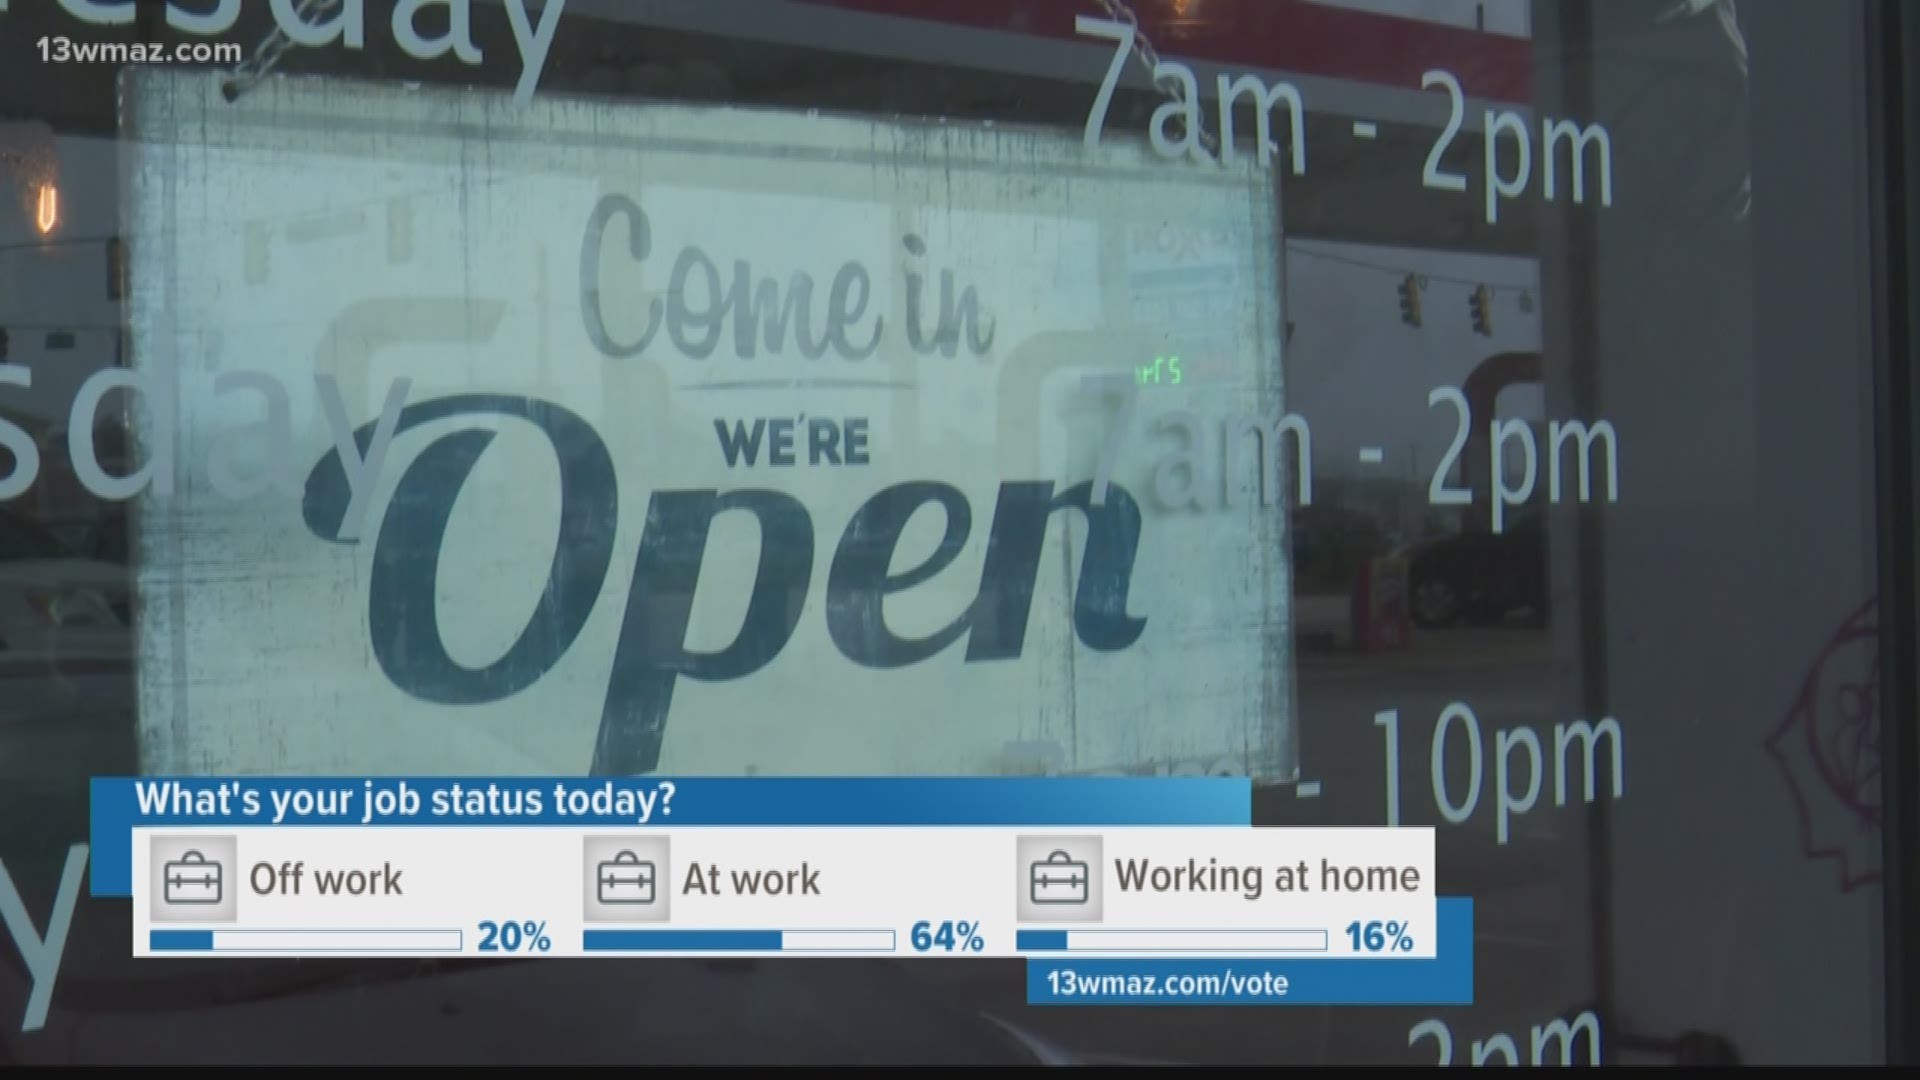 Businesses across the US are closing their doors amid coronavirus concerns, and some employees are left wondering where their next paycheck will come from.